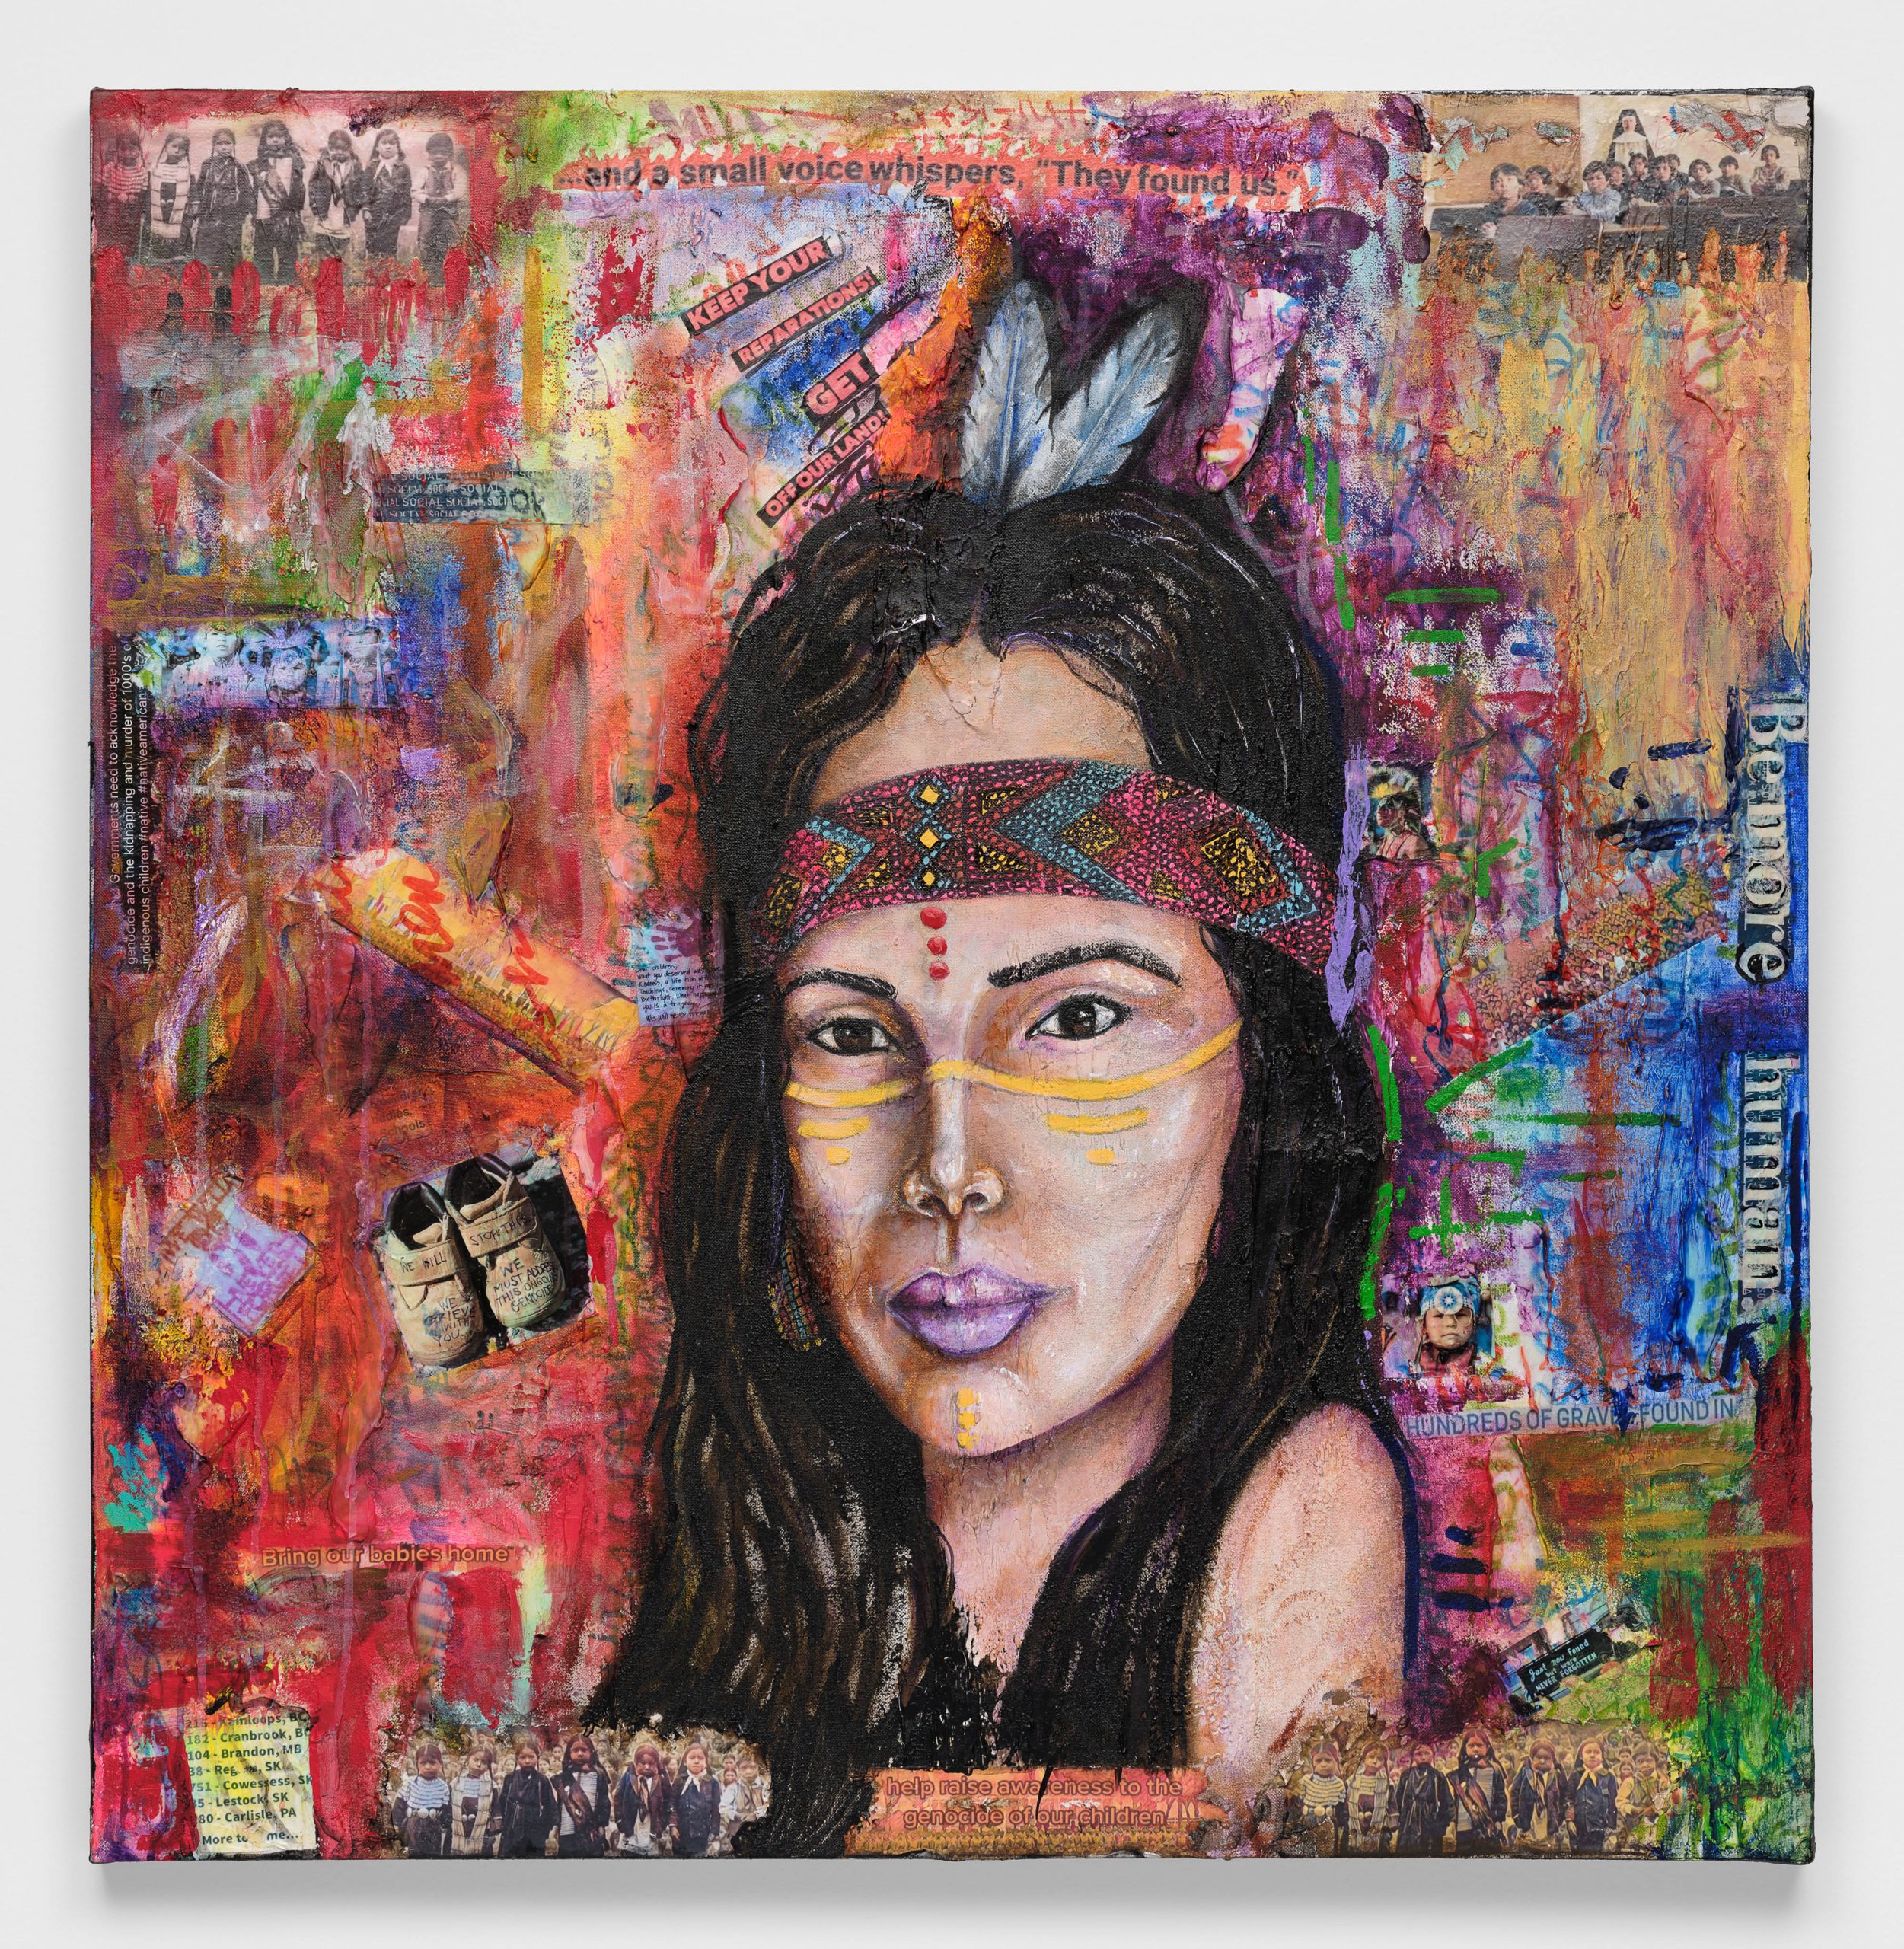 The face of an Indigenous woman wearing wearing a beaded handband and feathers in her hair appears before a multi-colored collage background with images and text on the genocide of Indigenous children, in mixed media.